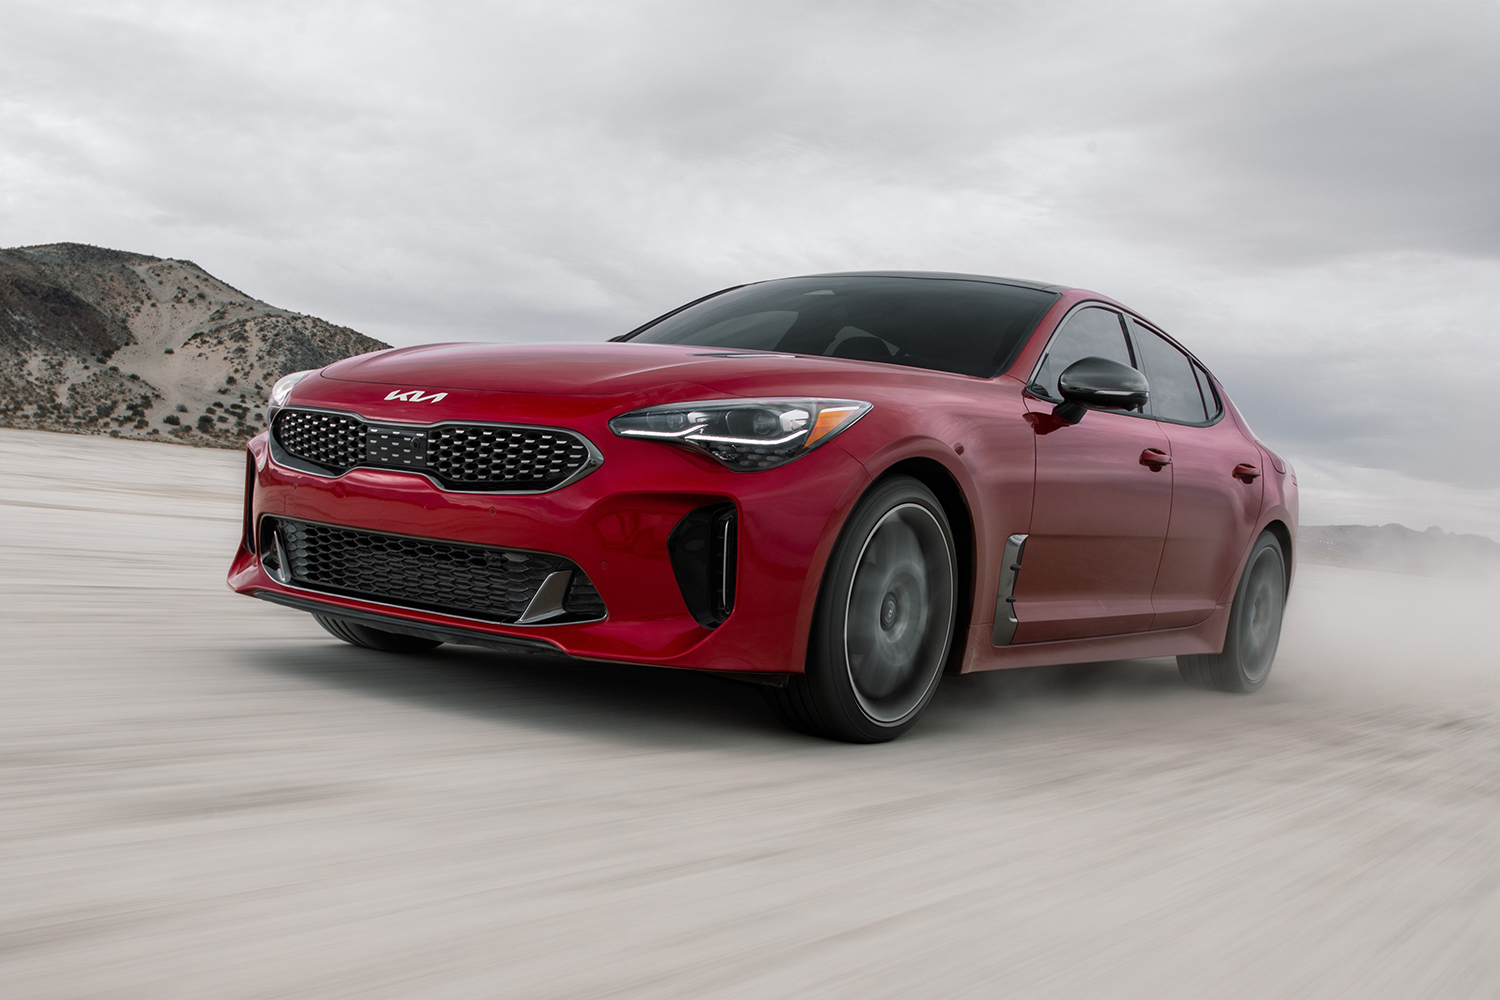 The Kia Stinger GT, one of our favorite vehicles of 2021